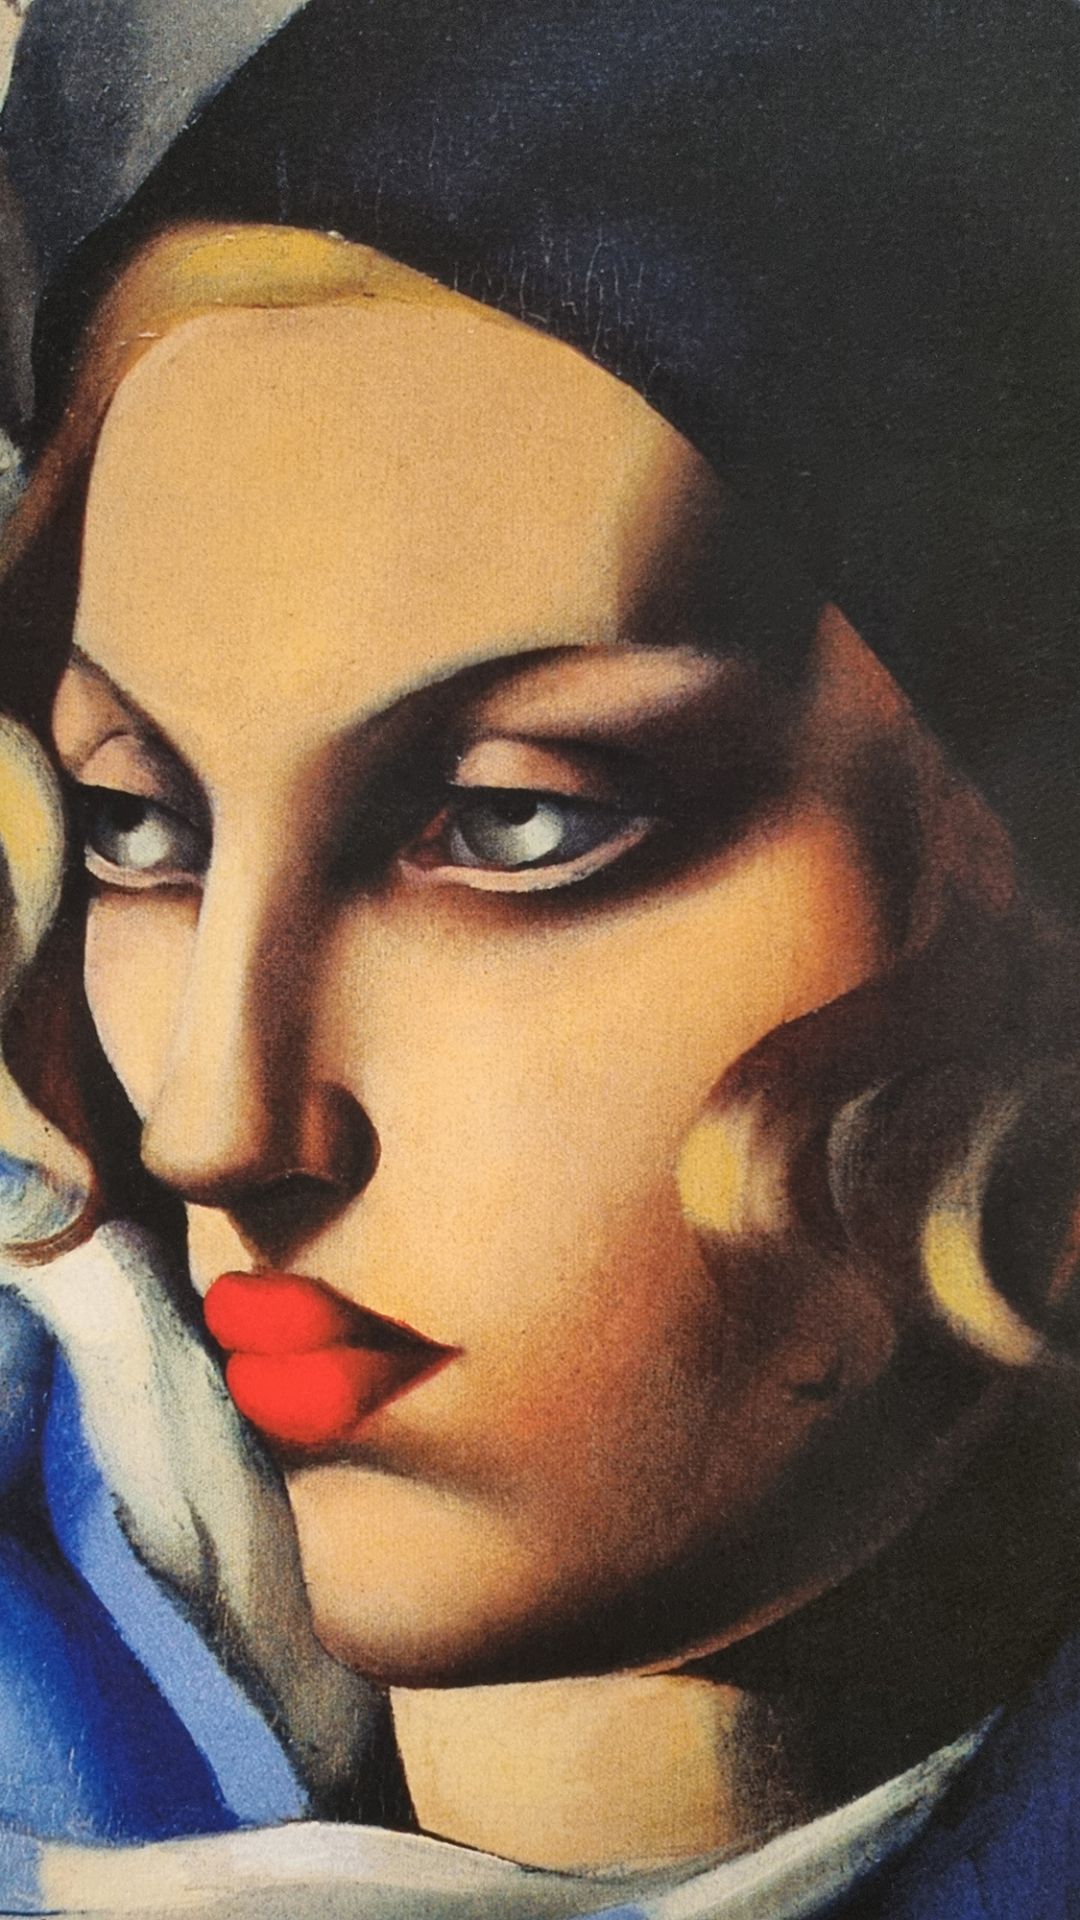 Tamara De Lempicka Limited Edition with Lempicka Estate (New York) Authenticated Certificate. - Image 4 of 5